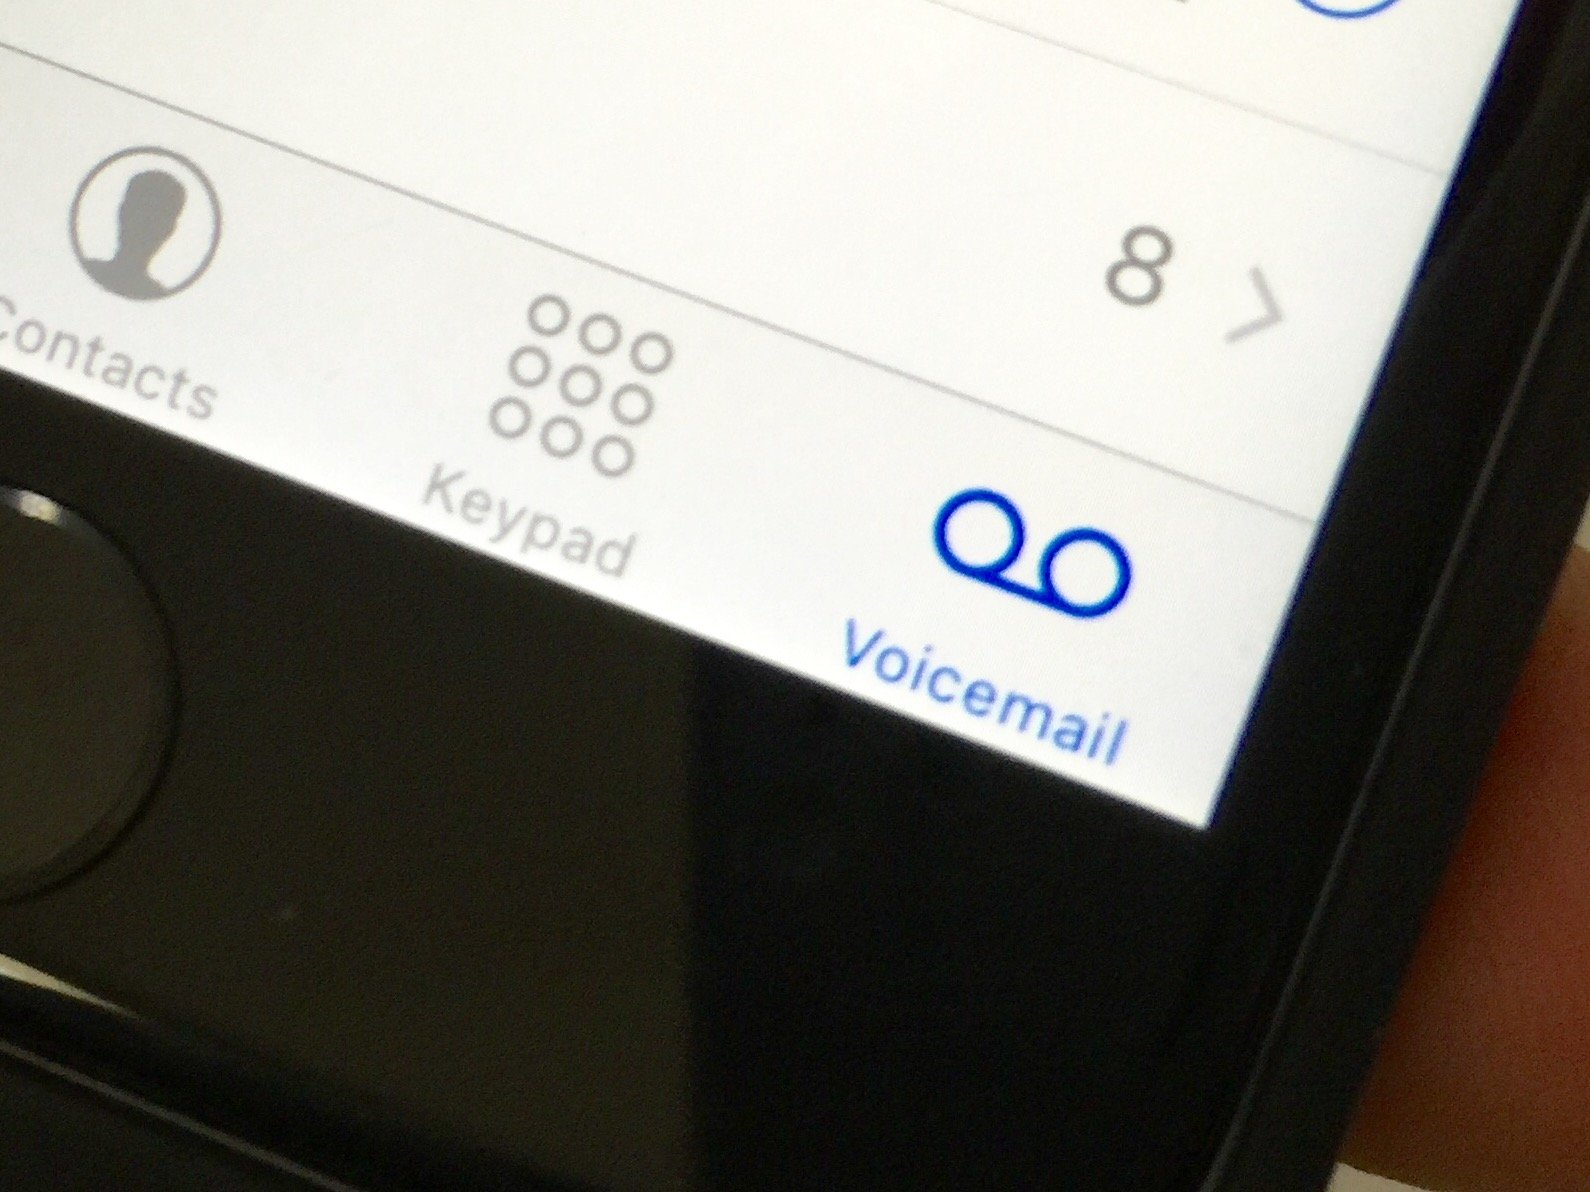 Learn how to set a custom iPhone voicemail greeting or message.